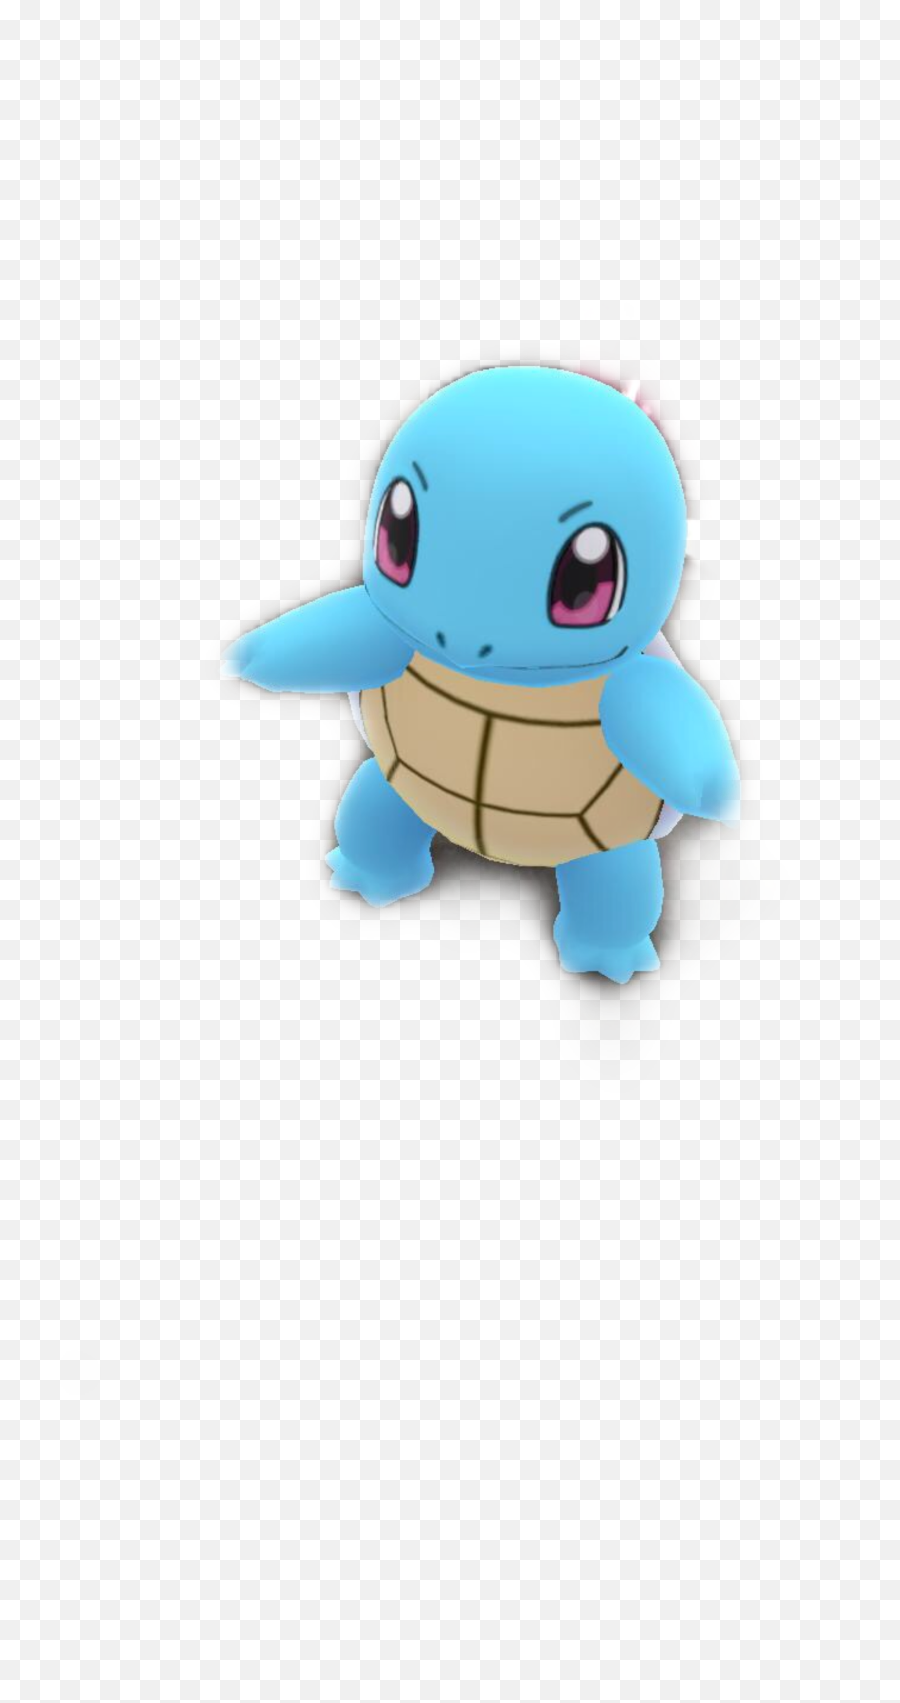 Squirtlesquad - Fictional Character Emoji,Squirtle Squad Emoji